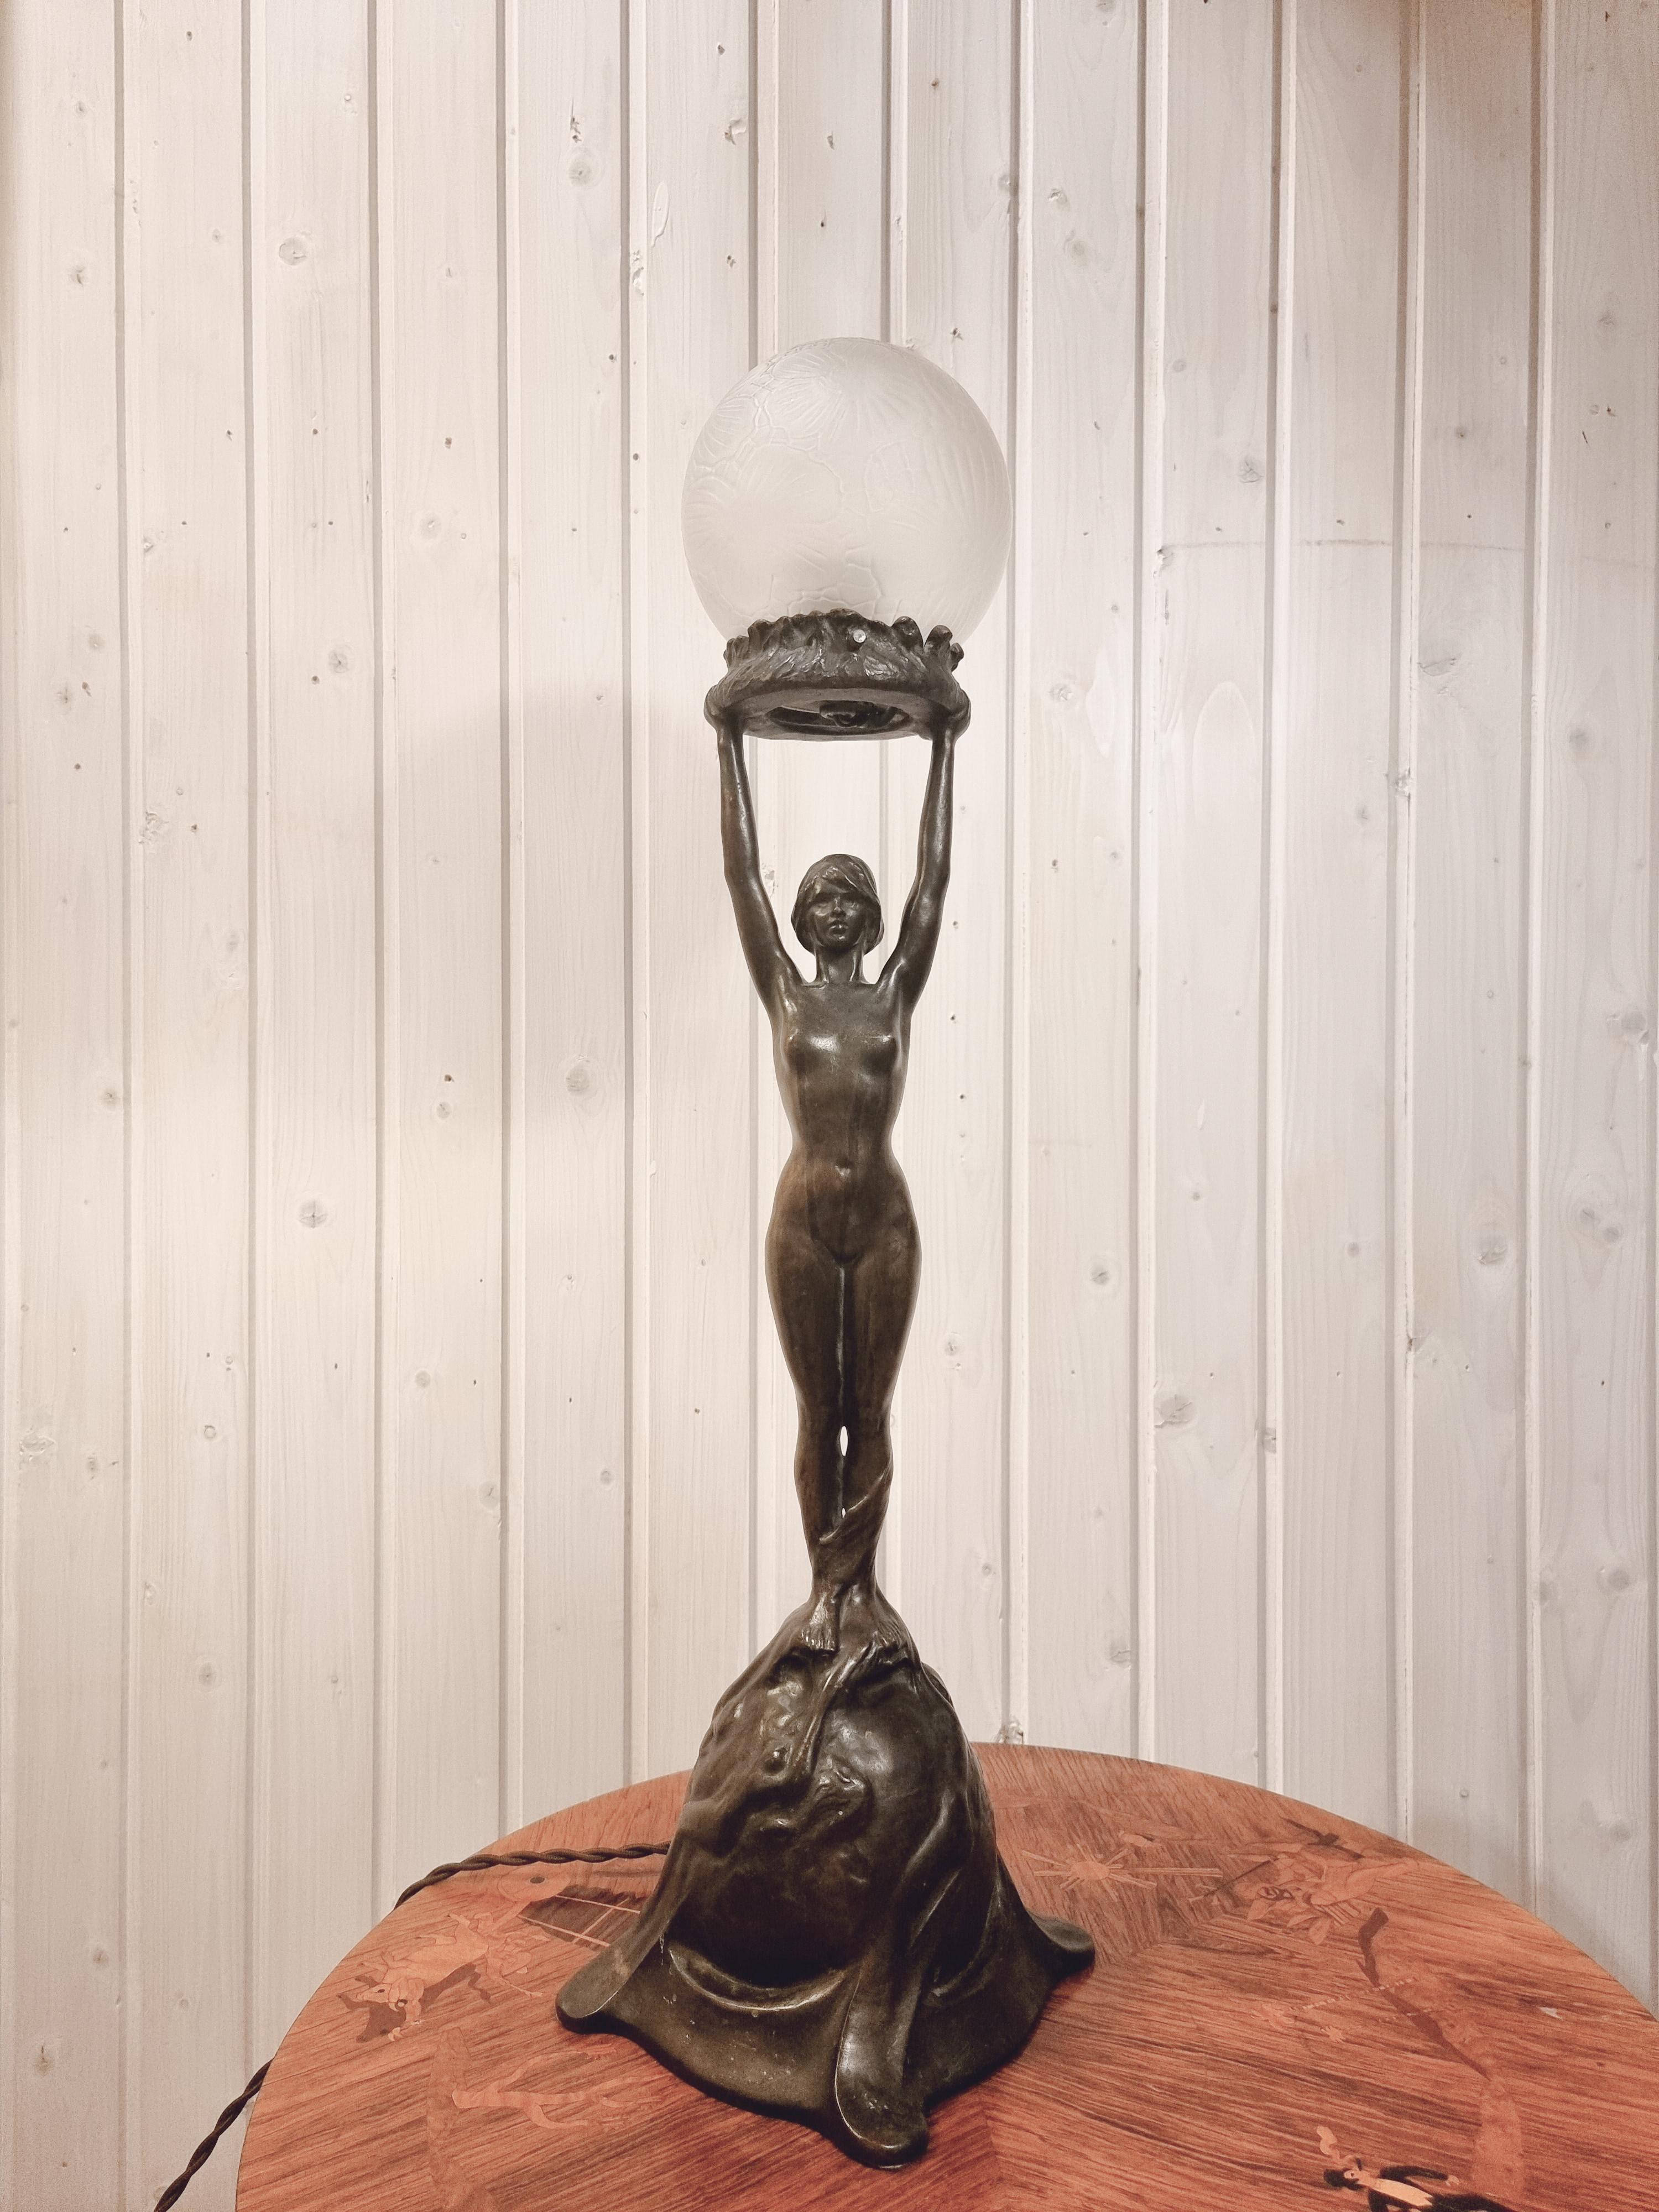 Rare sculptural table lamp, model Solen/The Sun, in the shape of a woman in solid bronze. Glass shade with beautiful flower patterns.

Signed Gerda Sprinchorn. Manufactured by Herman Bergmans Gjuteri / foundry, Stockholm early 1900s.

A version of